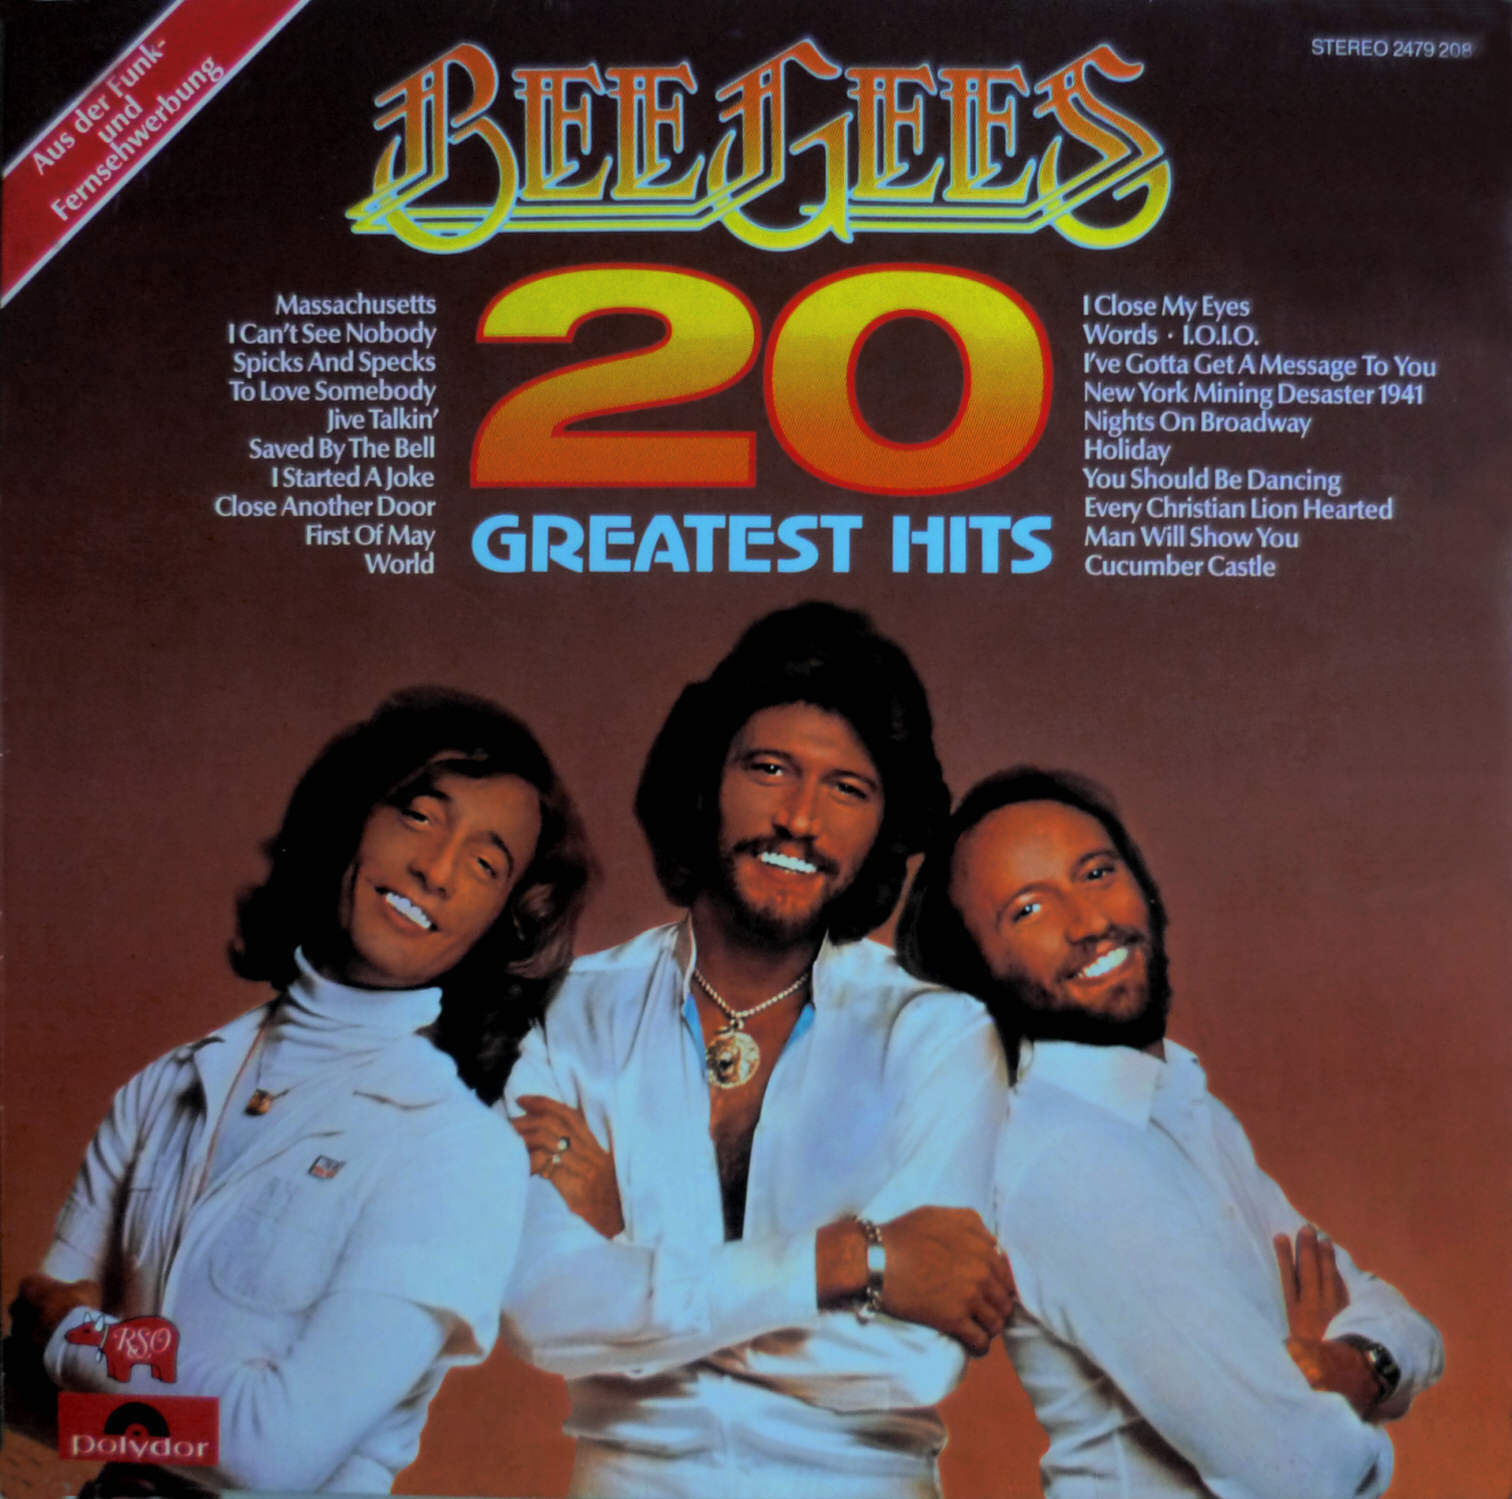 20 Greatest Hits - Bee Gees music collectible - Main Image 1